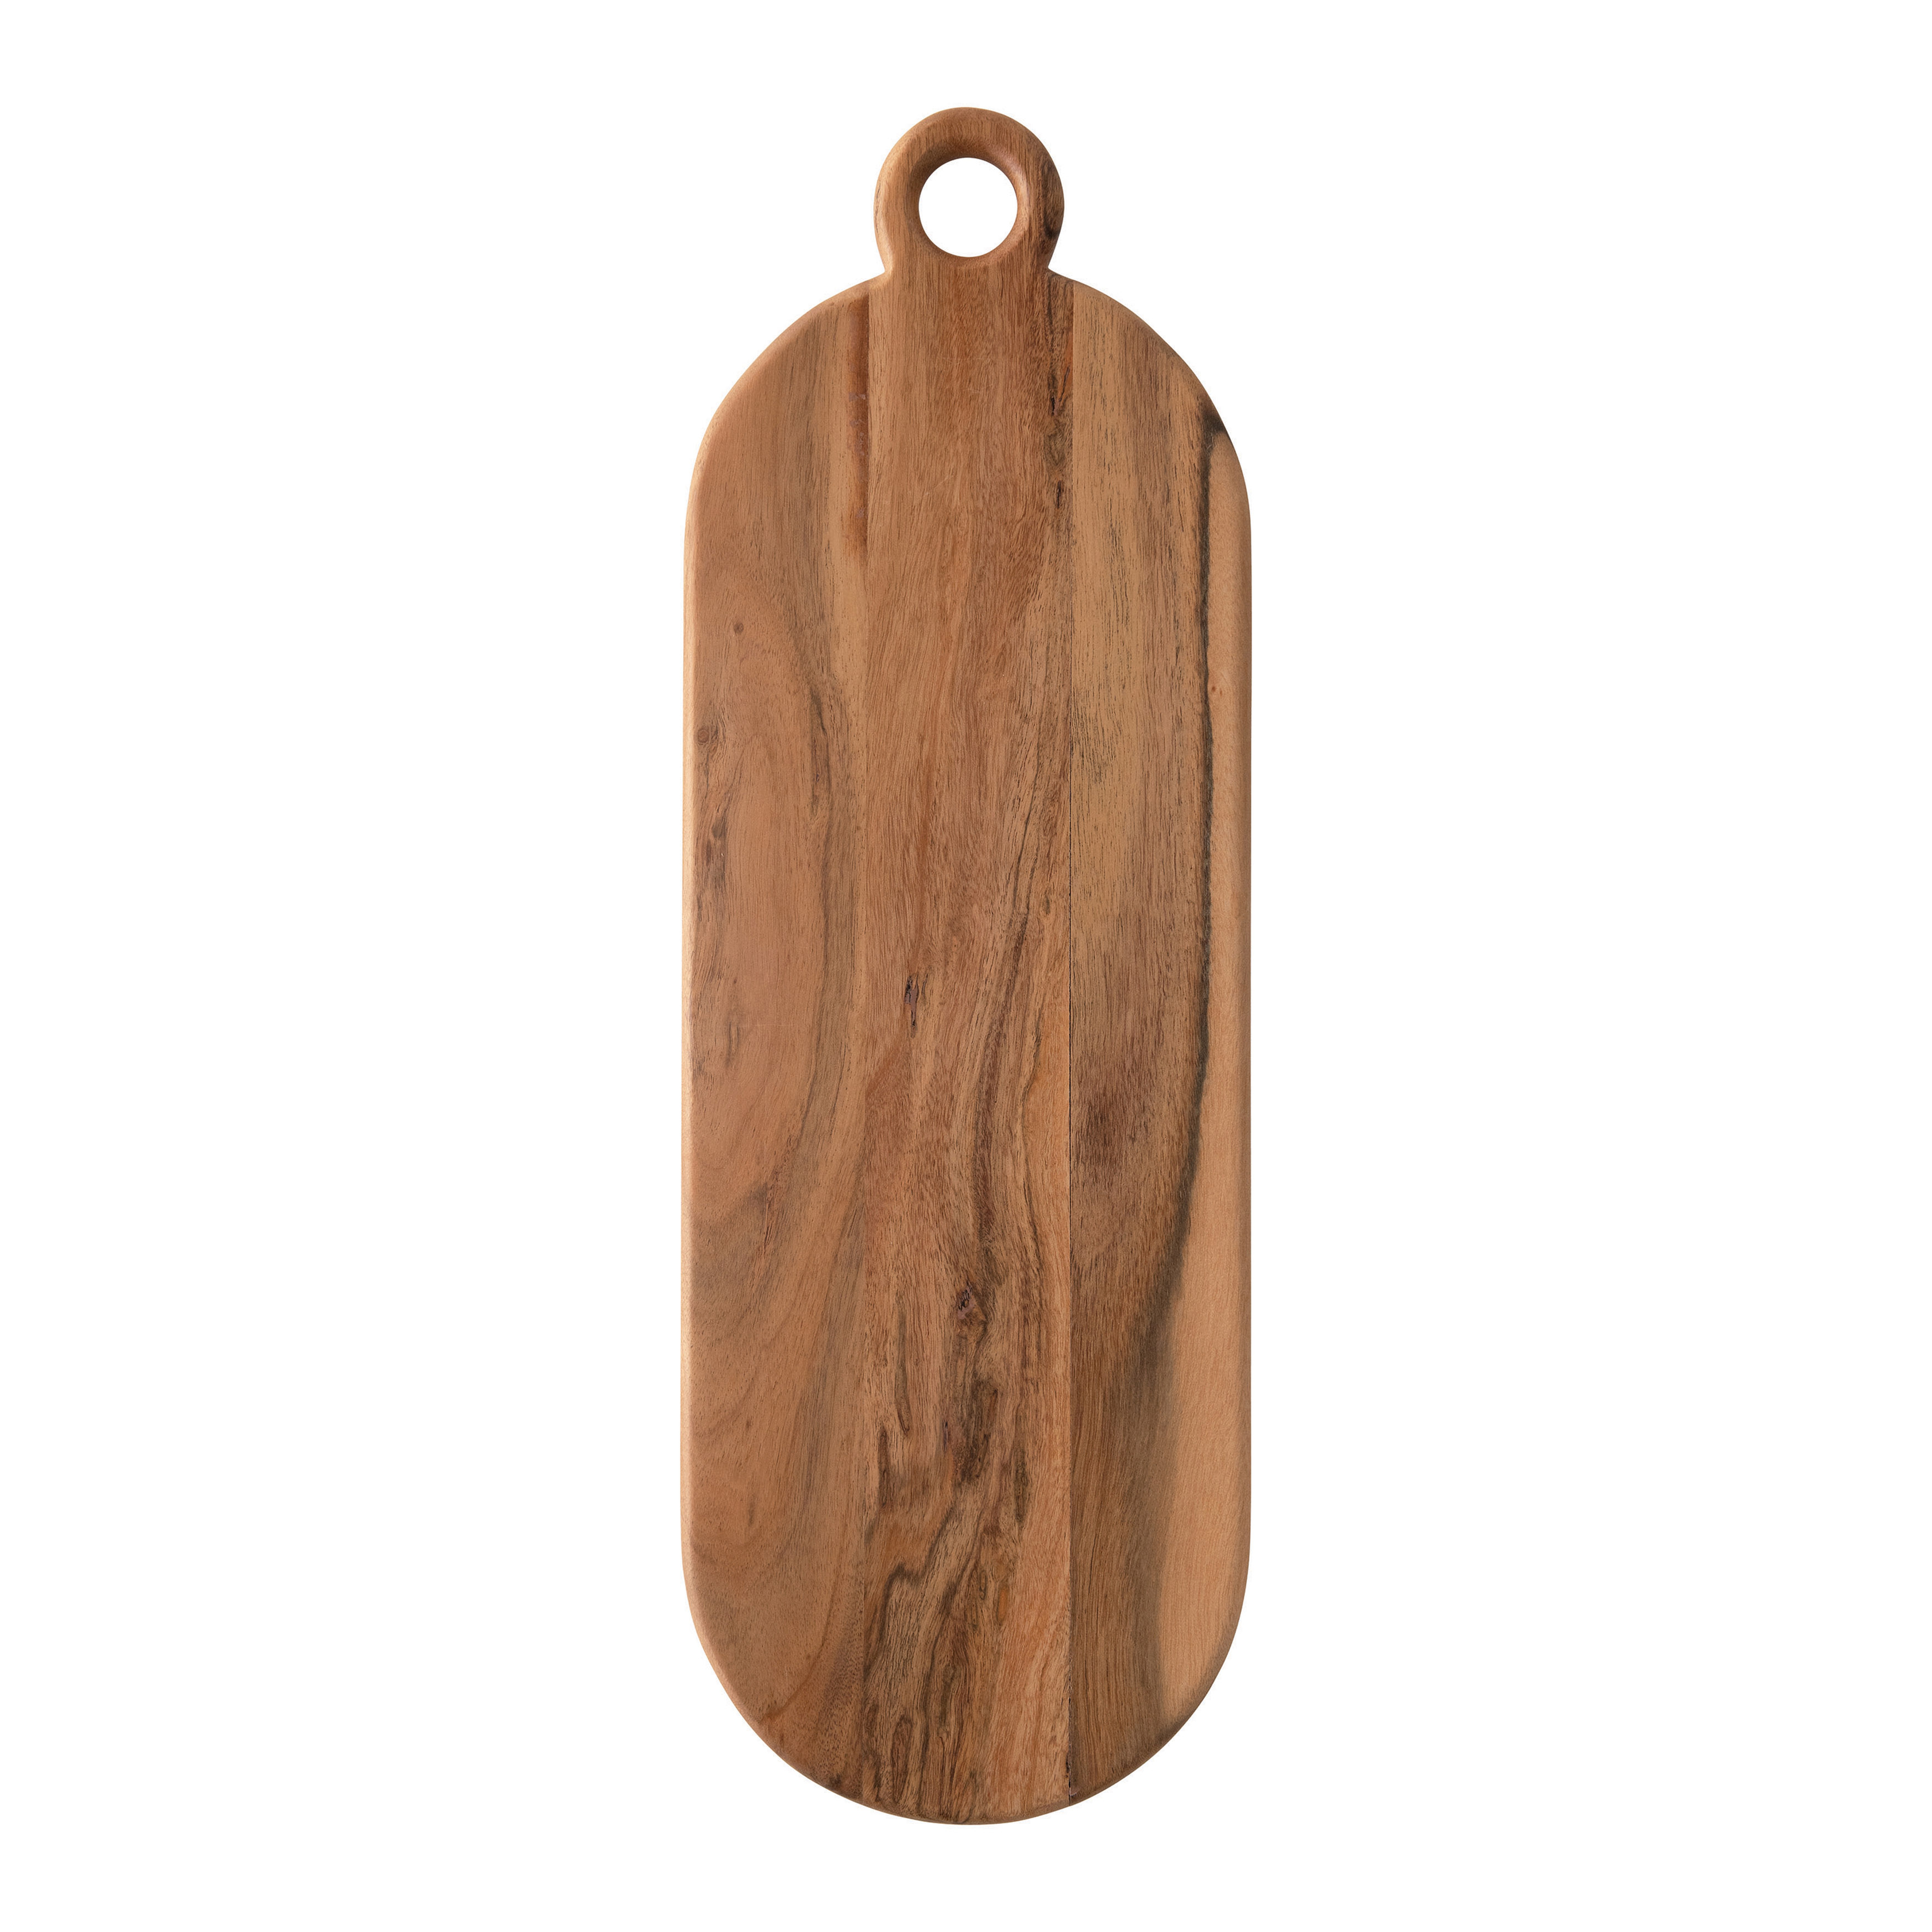 Acacia Wood Cheese/Cutting Board with Handle - Nomad Home